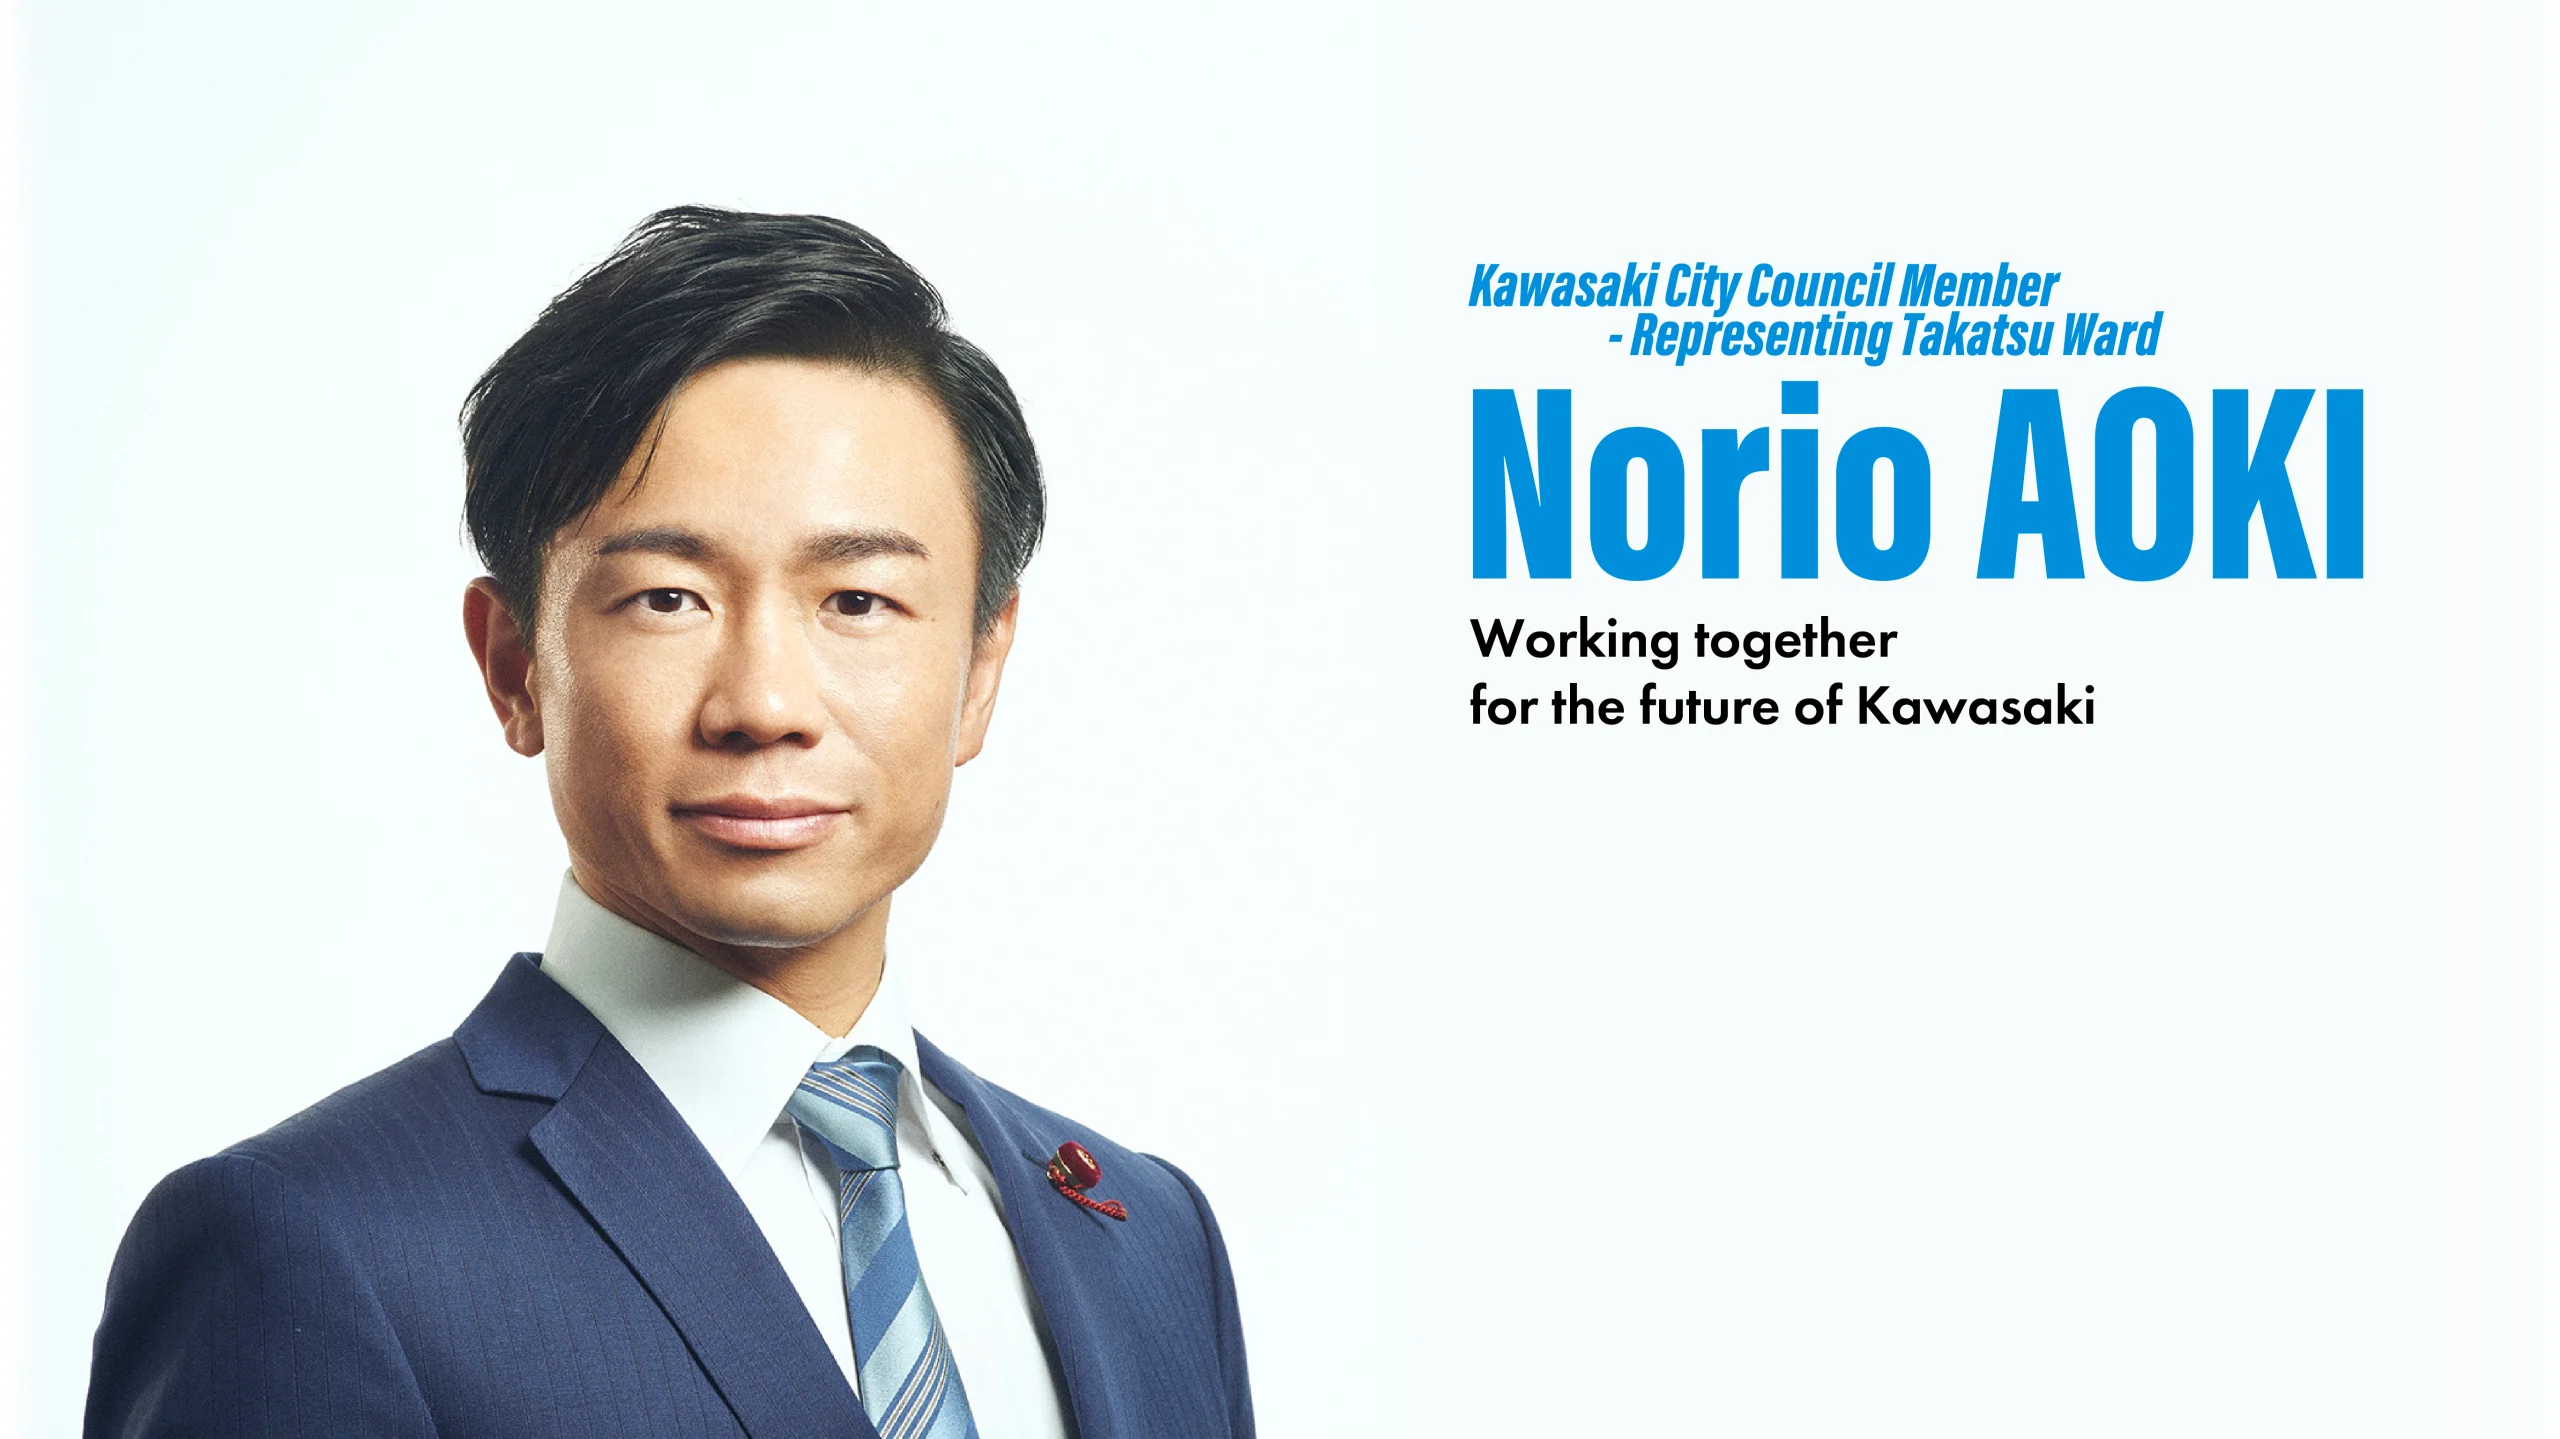 Background is the picture of Norio Aoki, and has following text at the side:
Kawasaki City Council Member - Representing Takatsu Ward

Norio Aoki

Working together for the future of Kawasaki